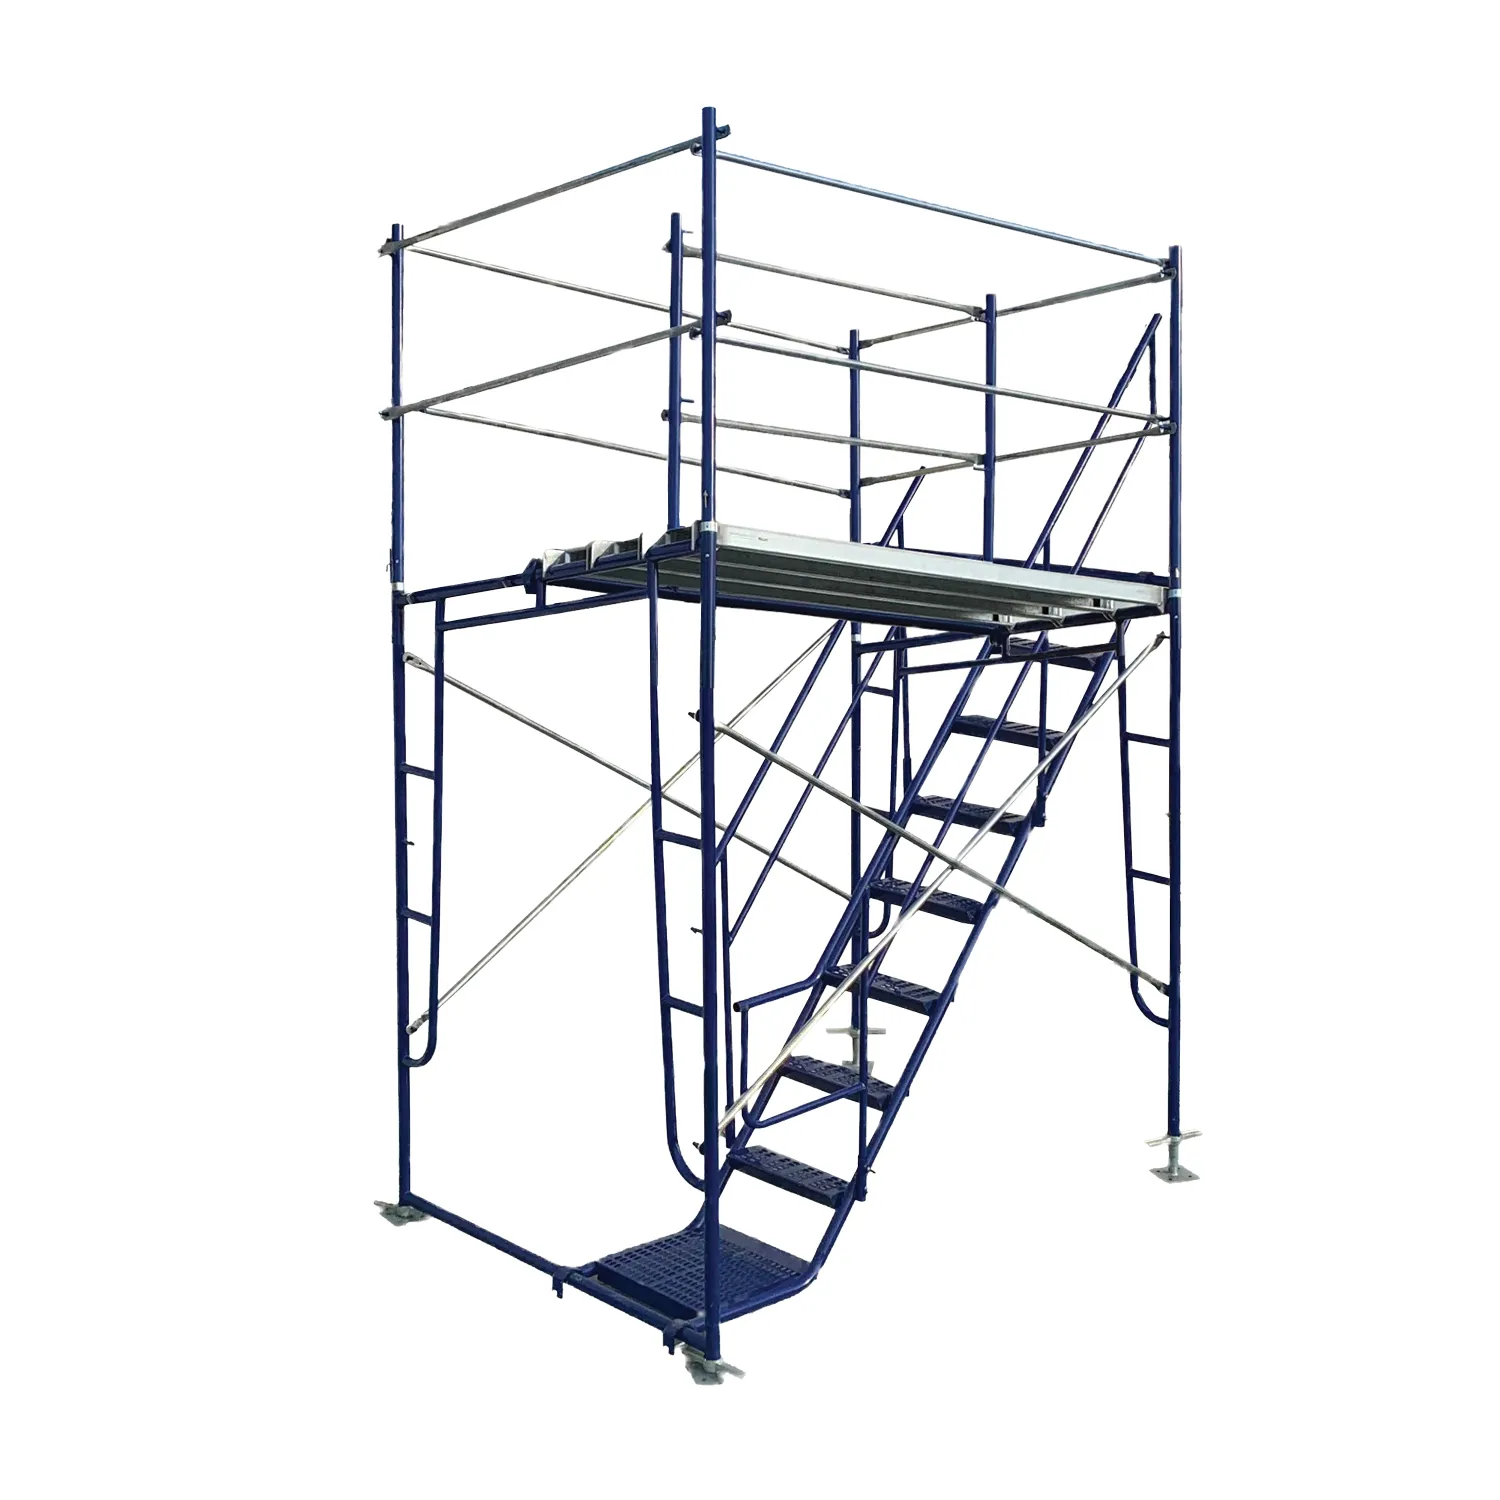 Stationary scaffold stair tower kit team809